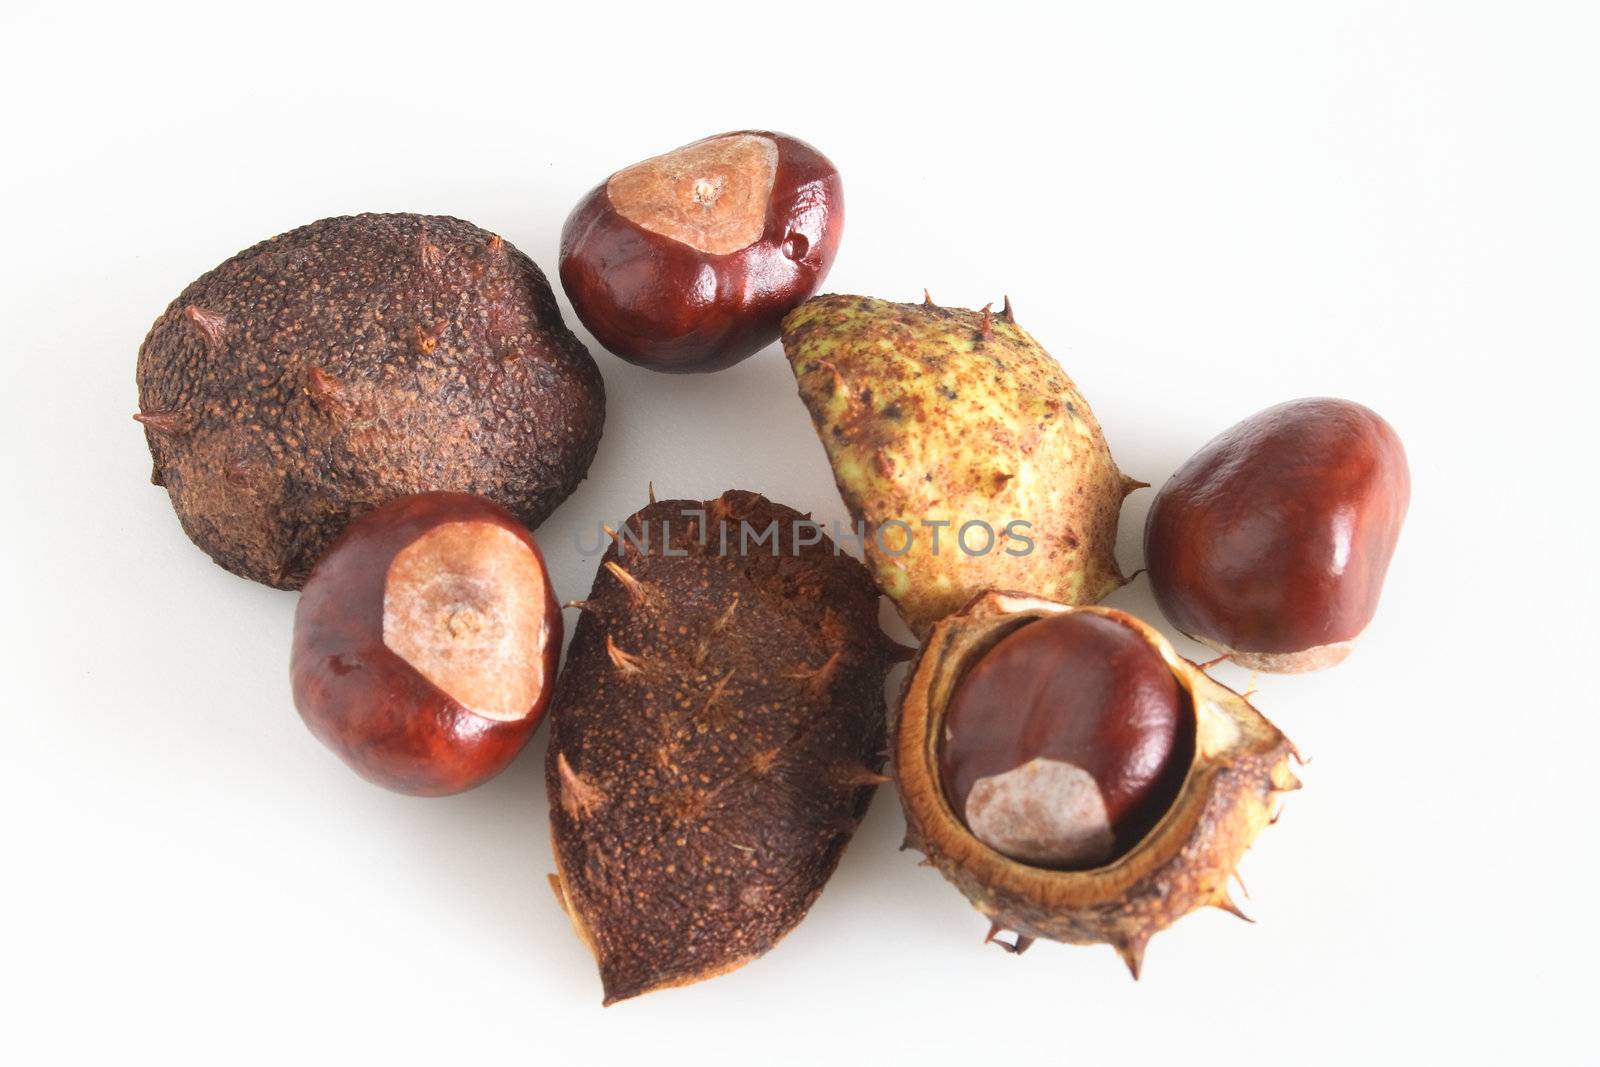 conkers and there shells over a light background